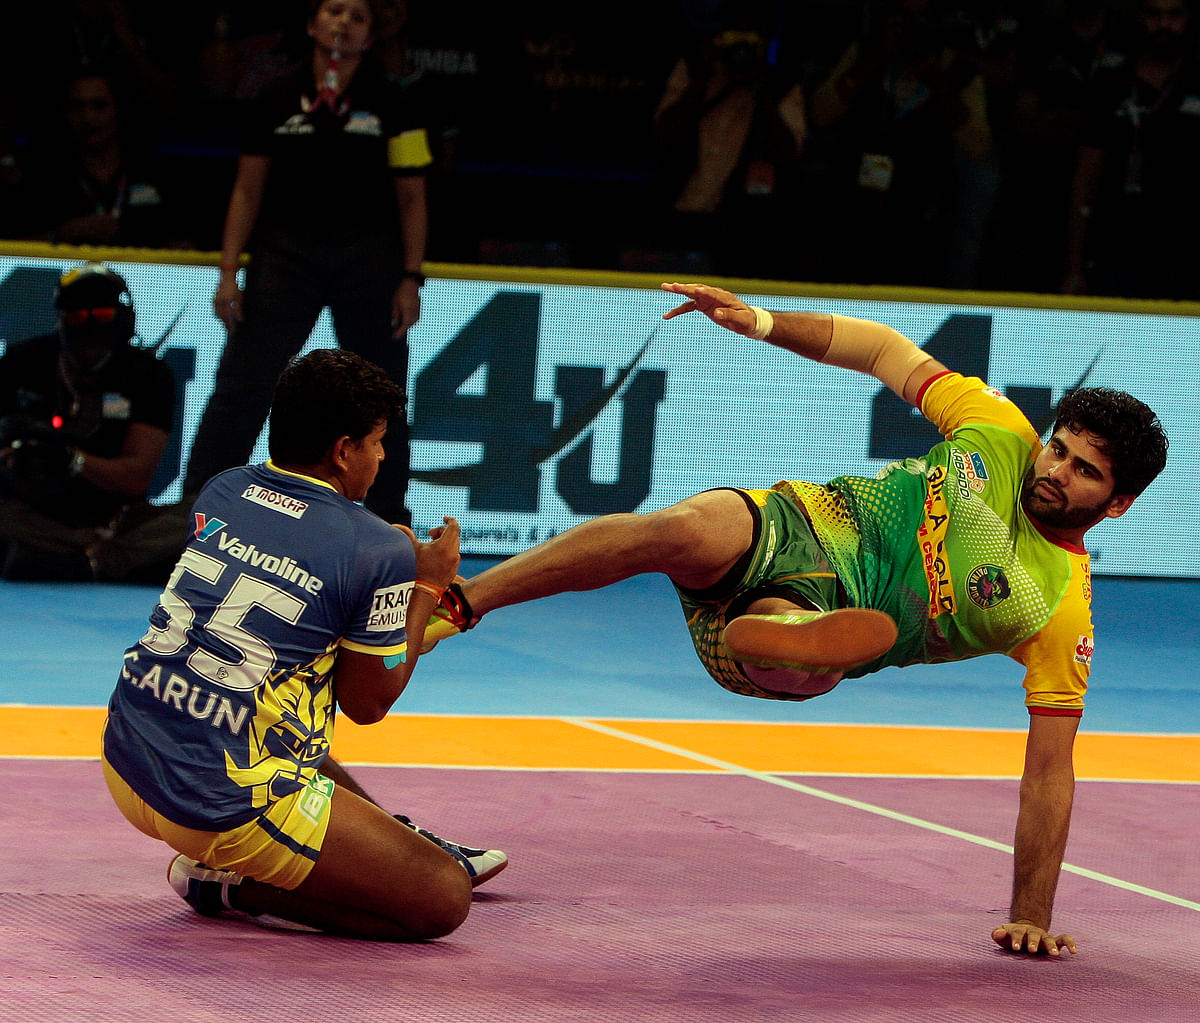 Tamil Thalaivas’ skipper Thakur returned to his winning ways as scored 14 points for the home side.